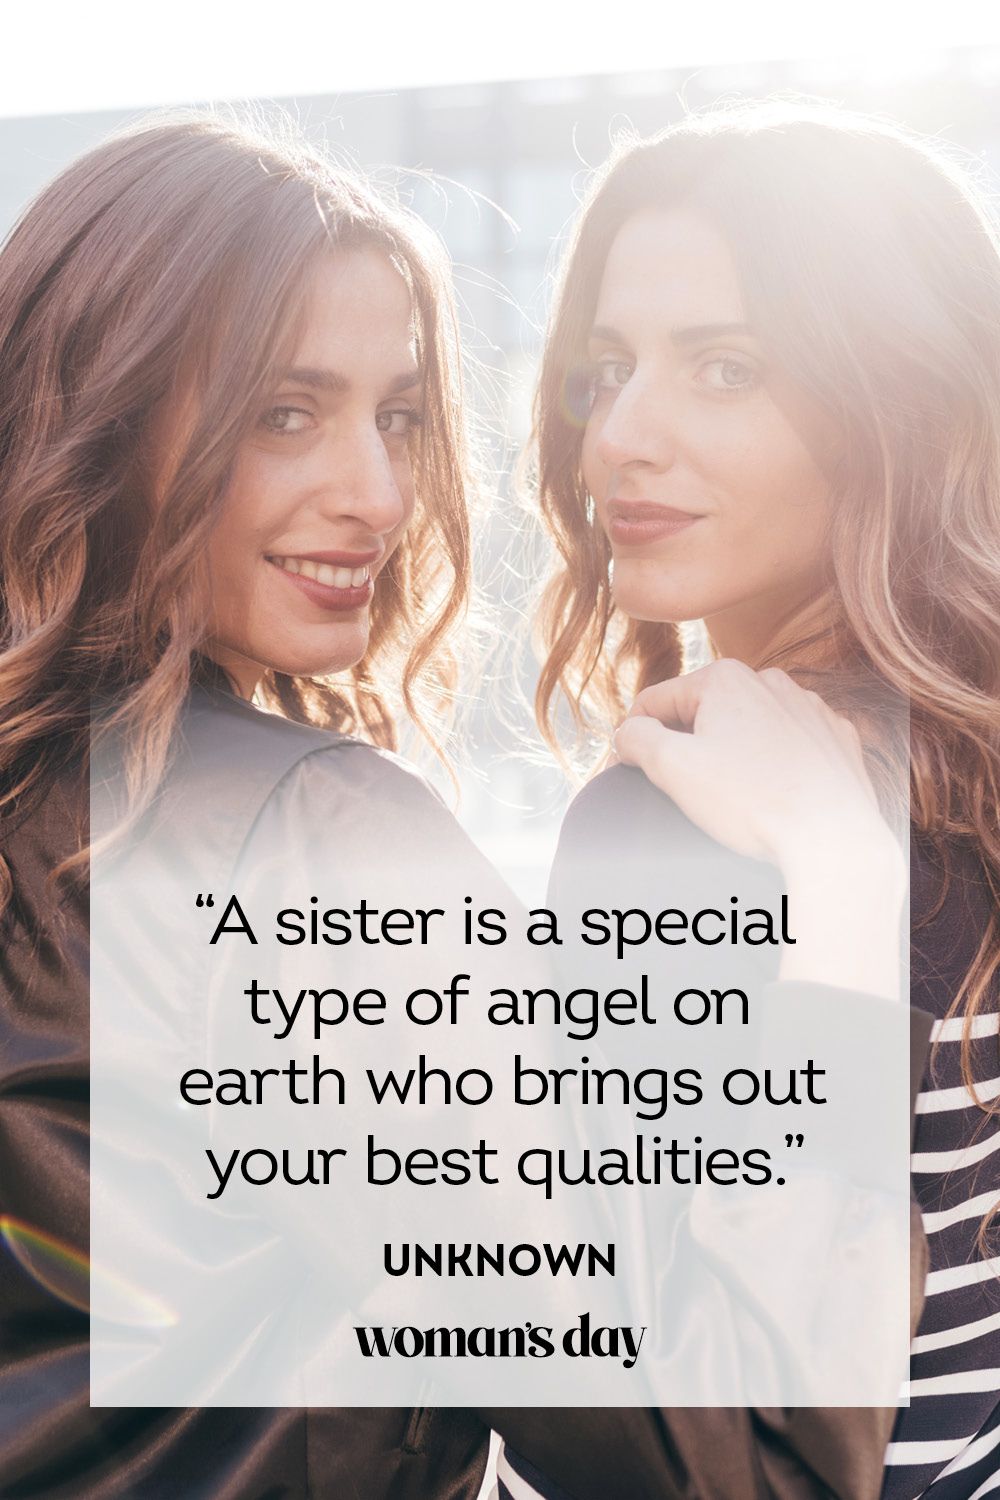 20 Best Sister Quotes - Cute and Happy Quotes About Sisters